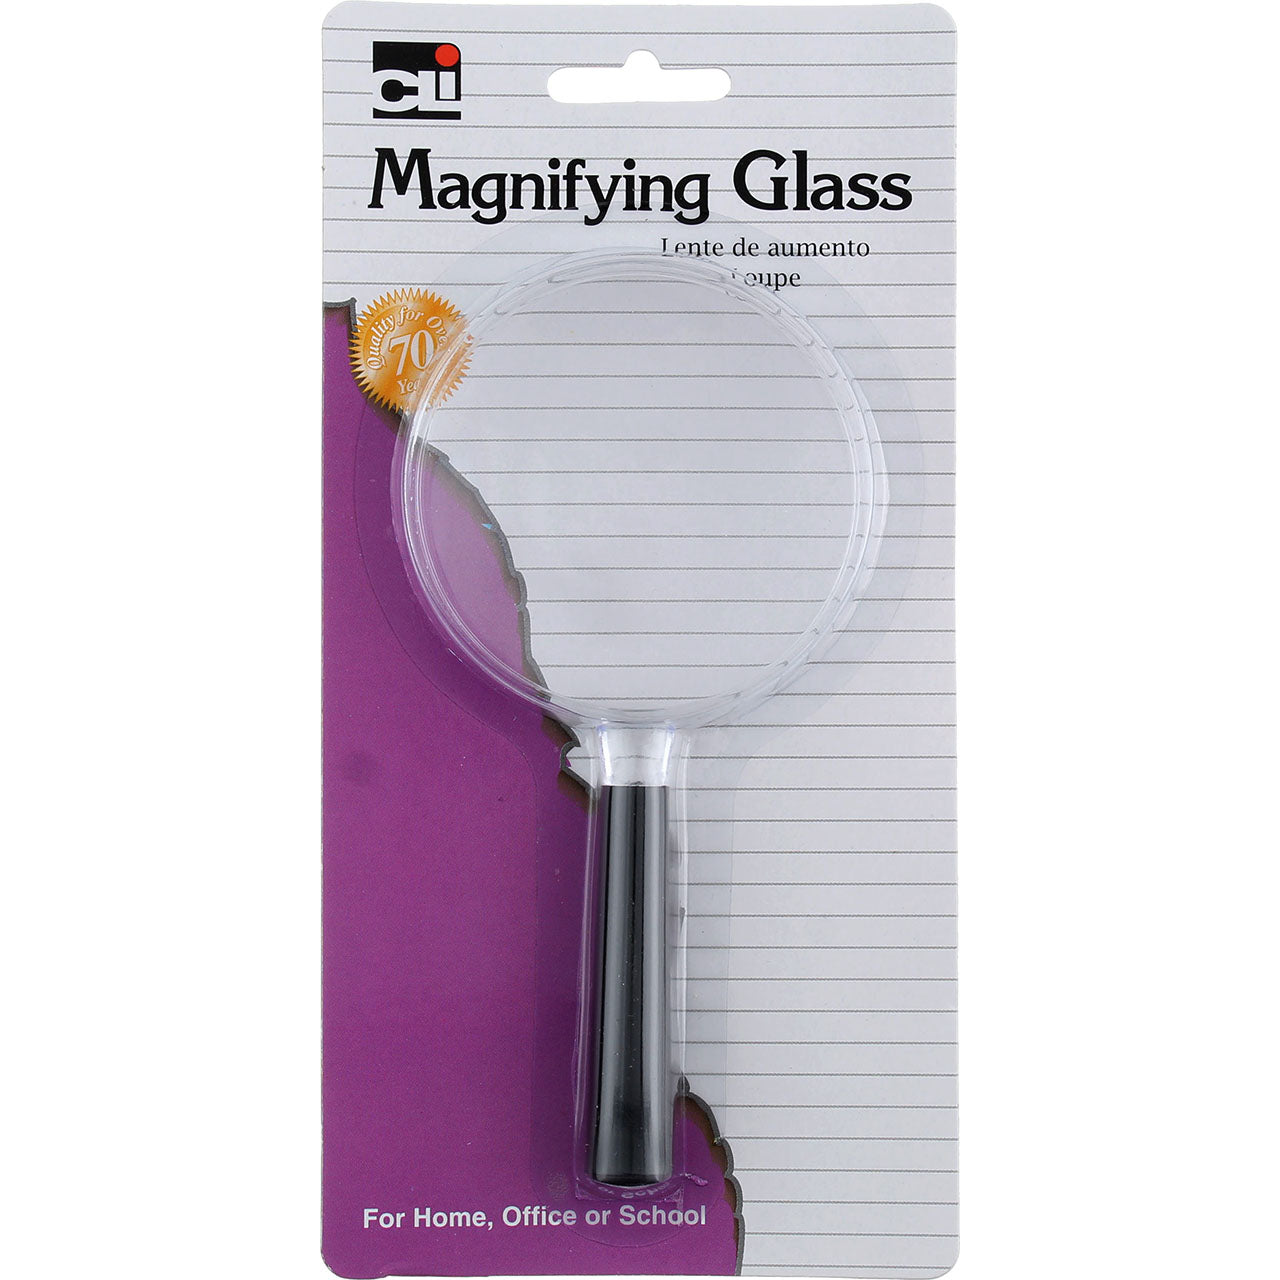 charles leonard 2x magnifying glass, 2 1/2 inch lens, 5.2 inch tall,  assorted colors (80212) 